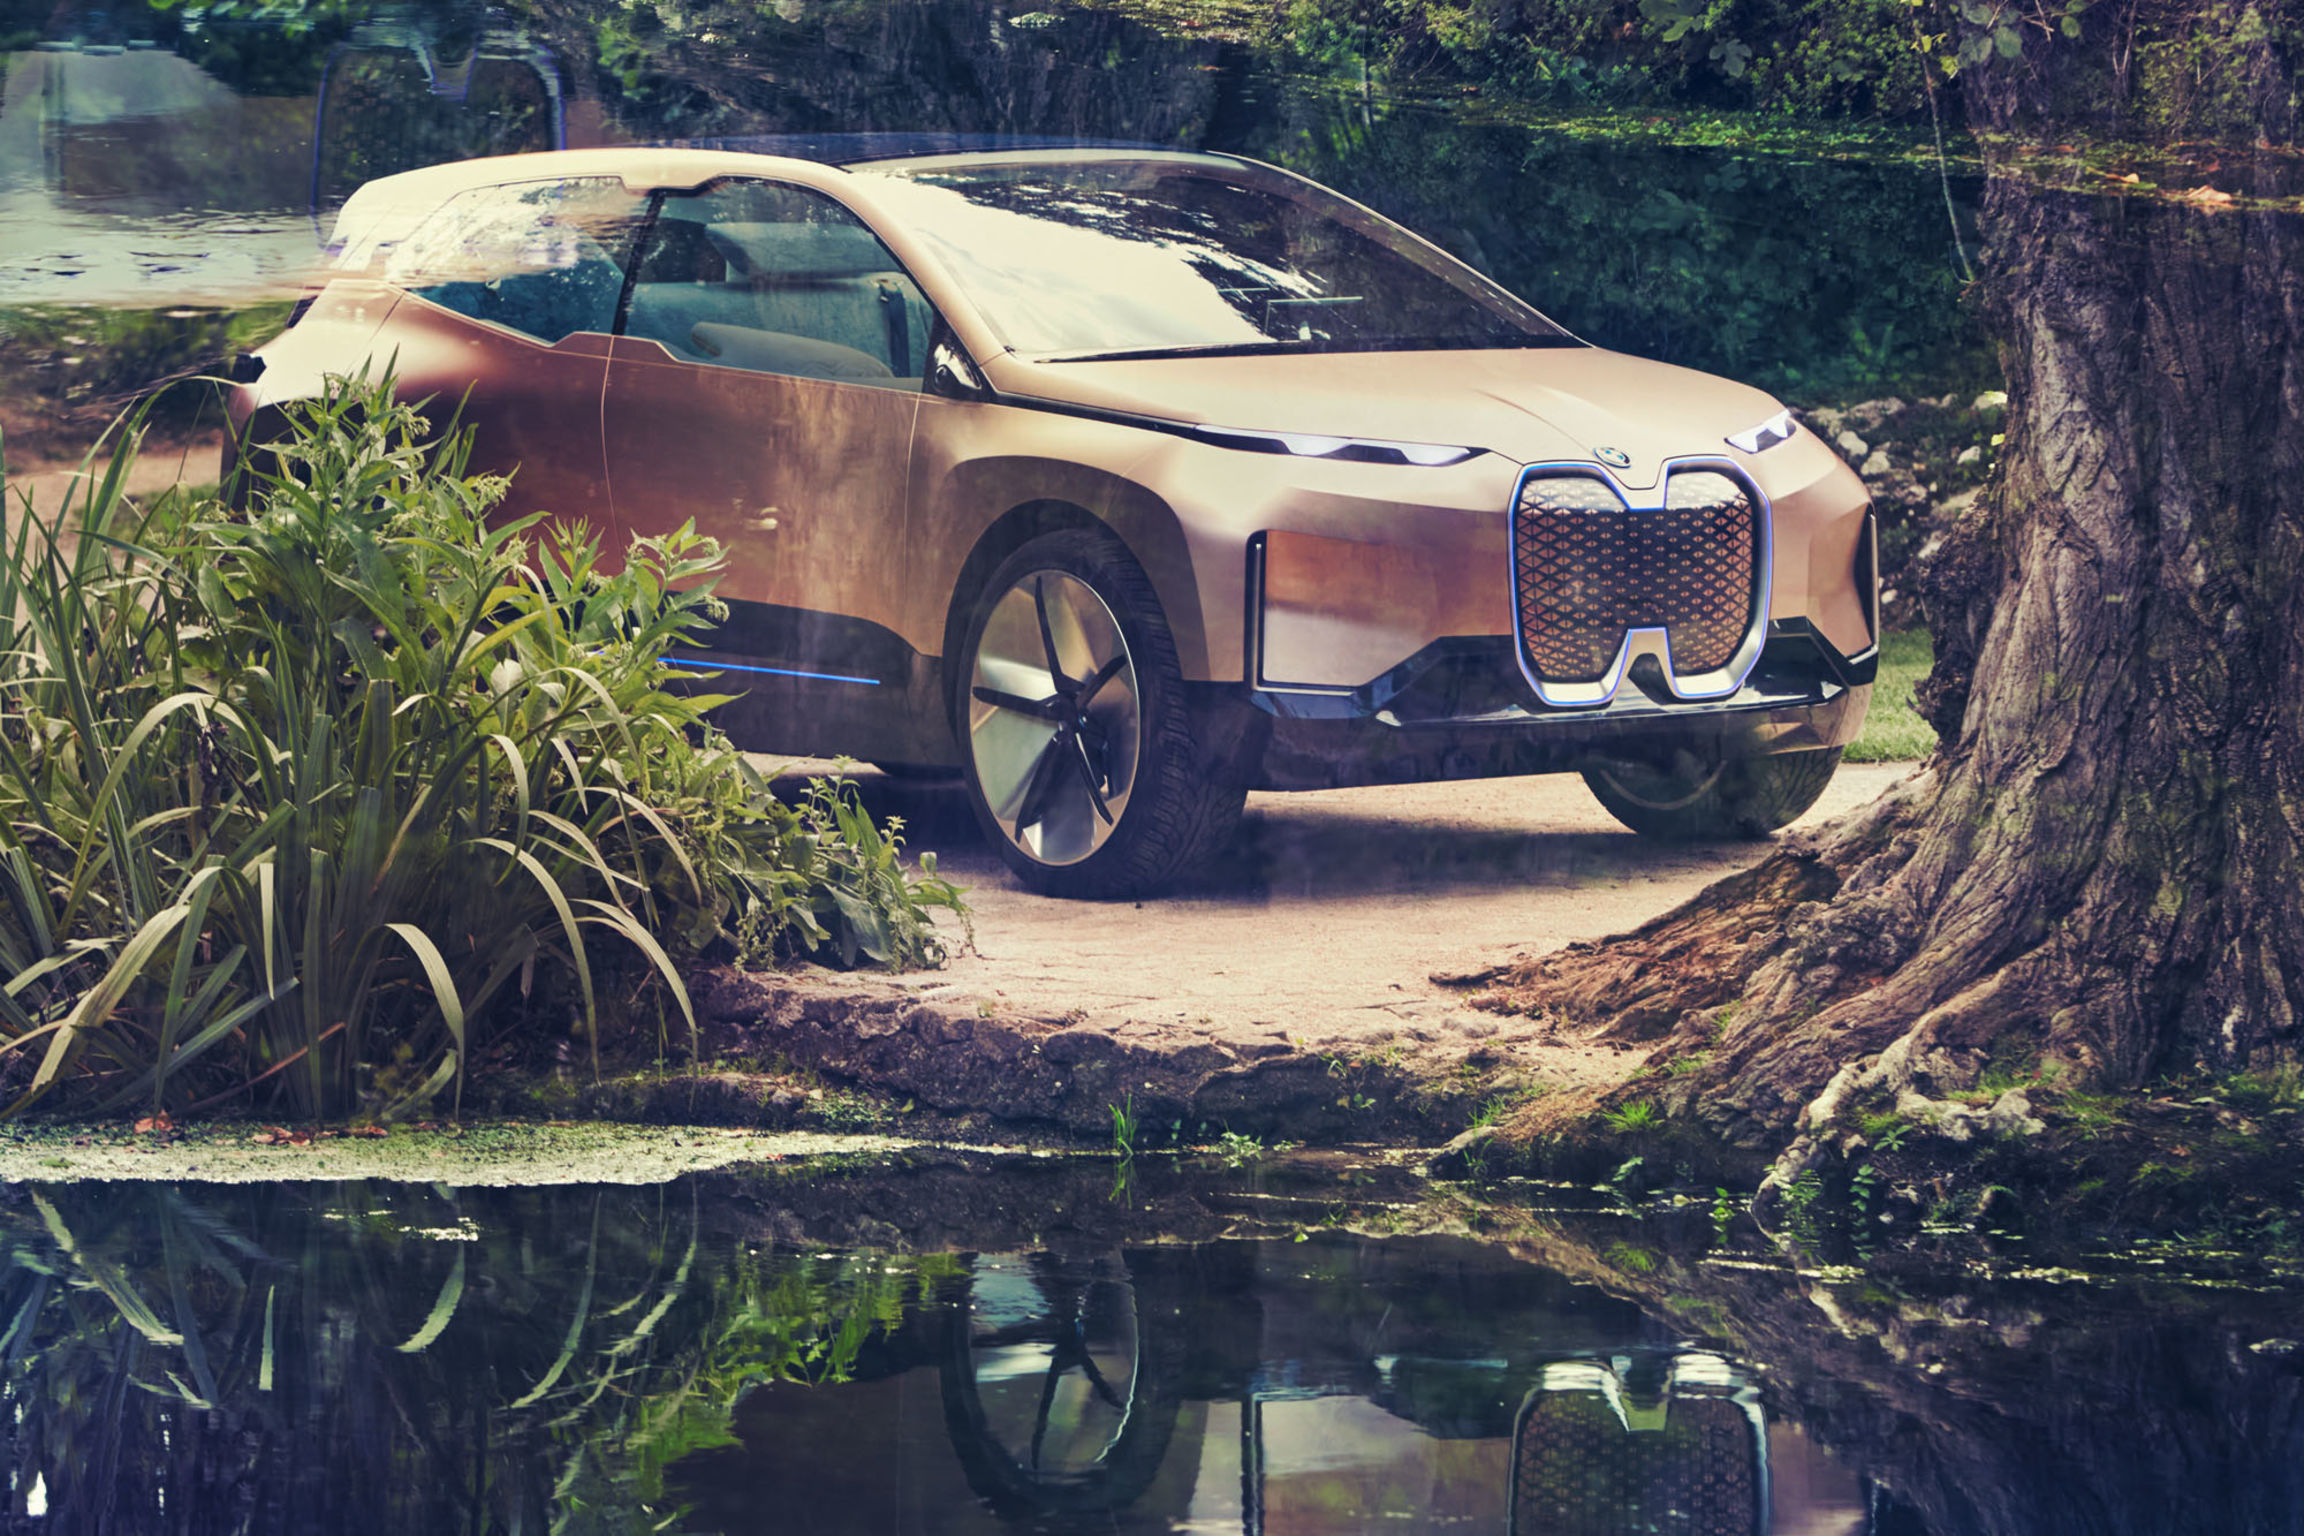 The BMW Vision iNEXT